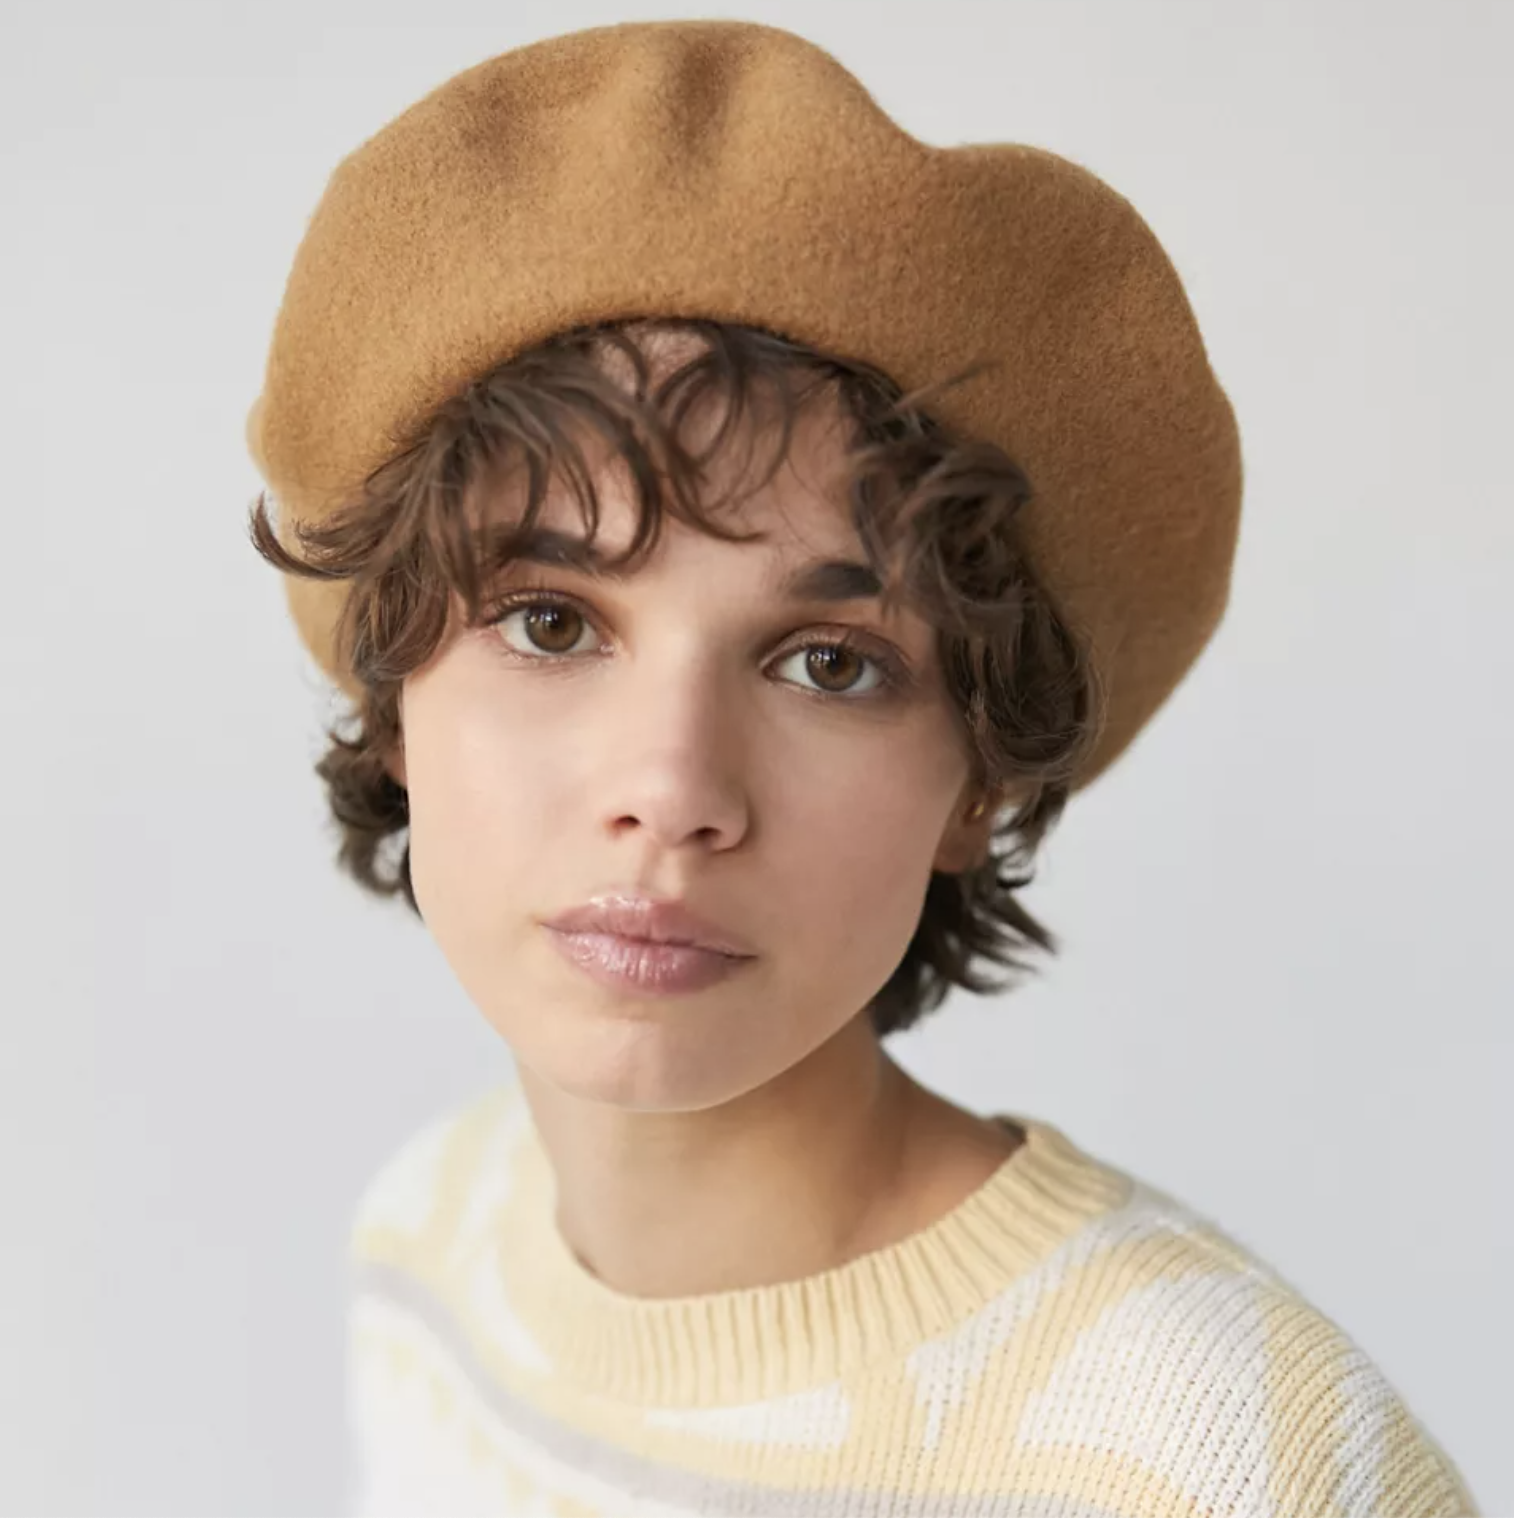 A person wearing the beret with a sweater